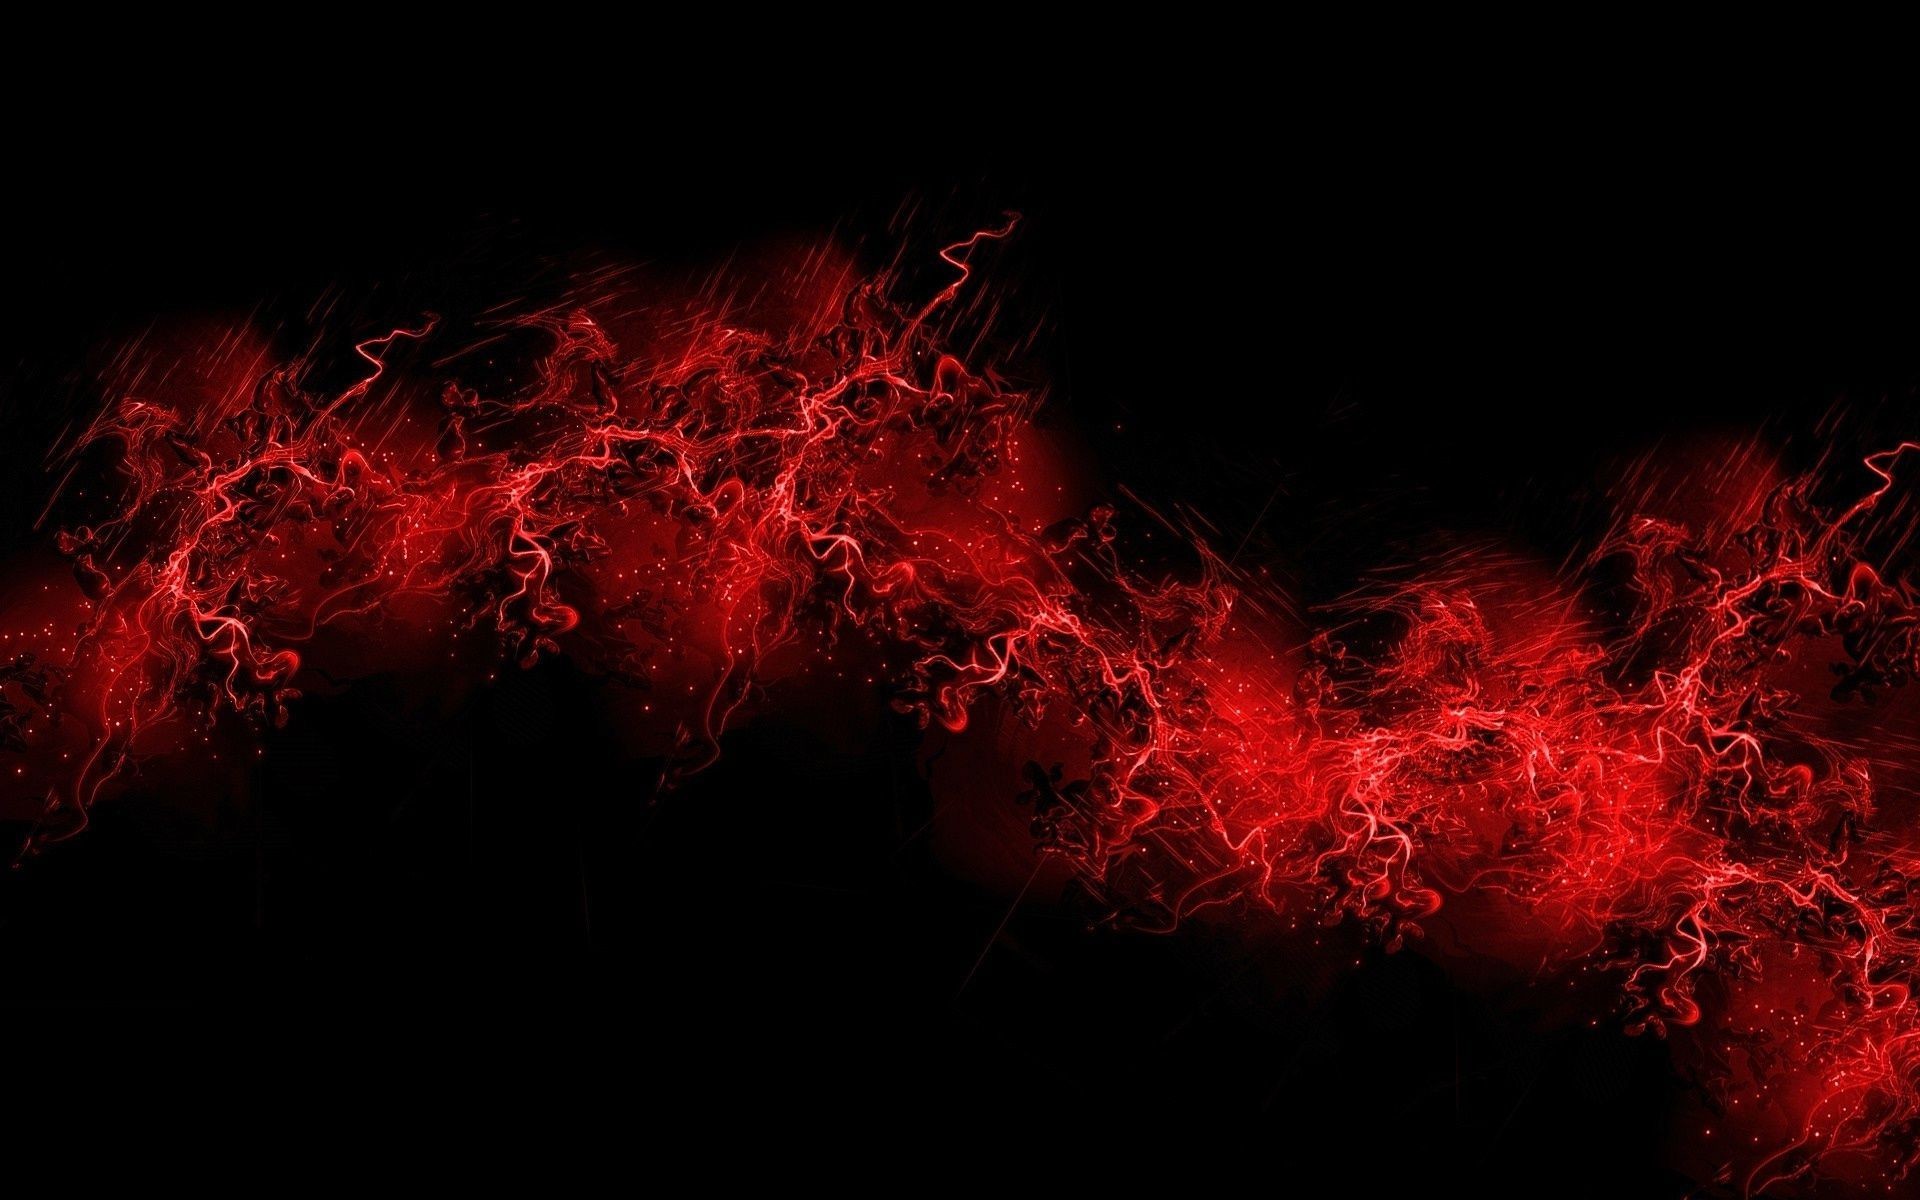 1920x1200 30 Black Red Abstract Backgrounds, HQ, Vespasien Kohnert black backgrounds  wallpapers Collection (61 ) ...